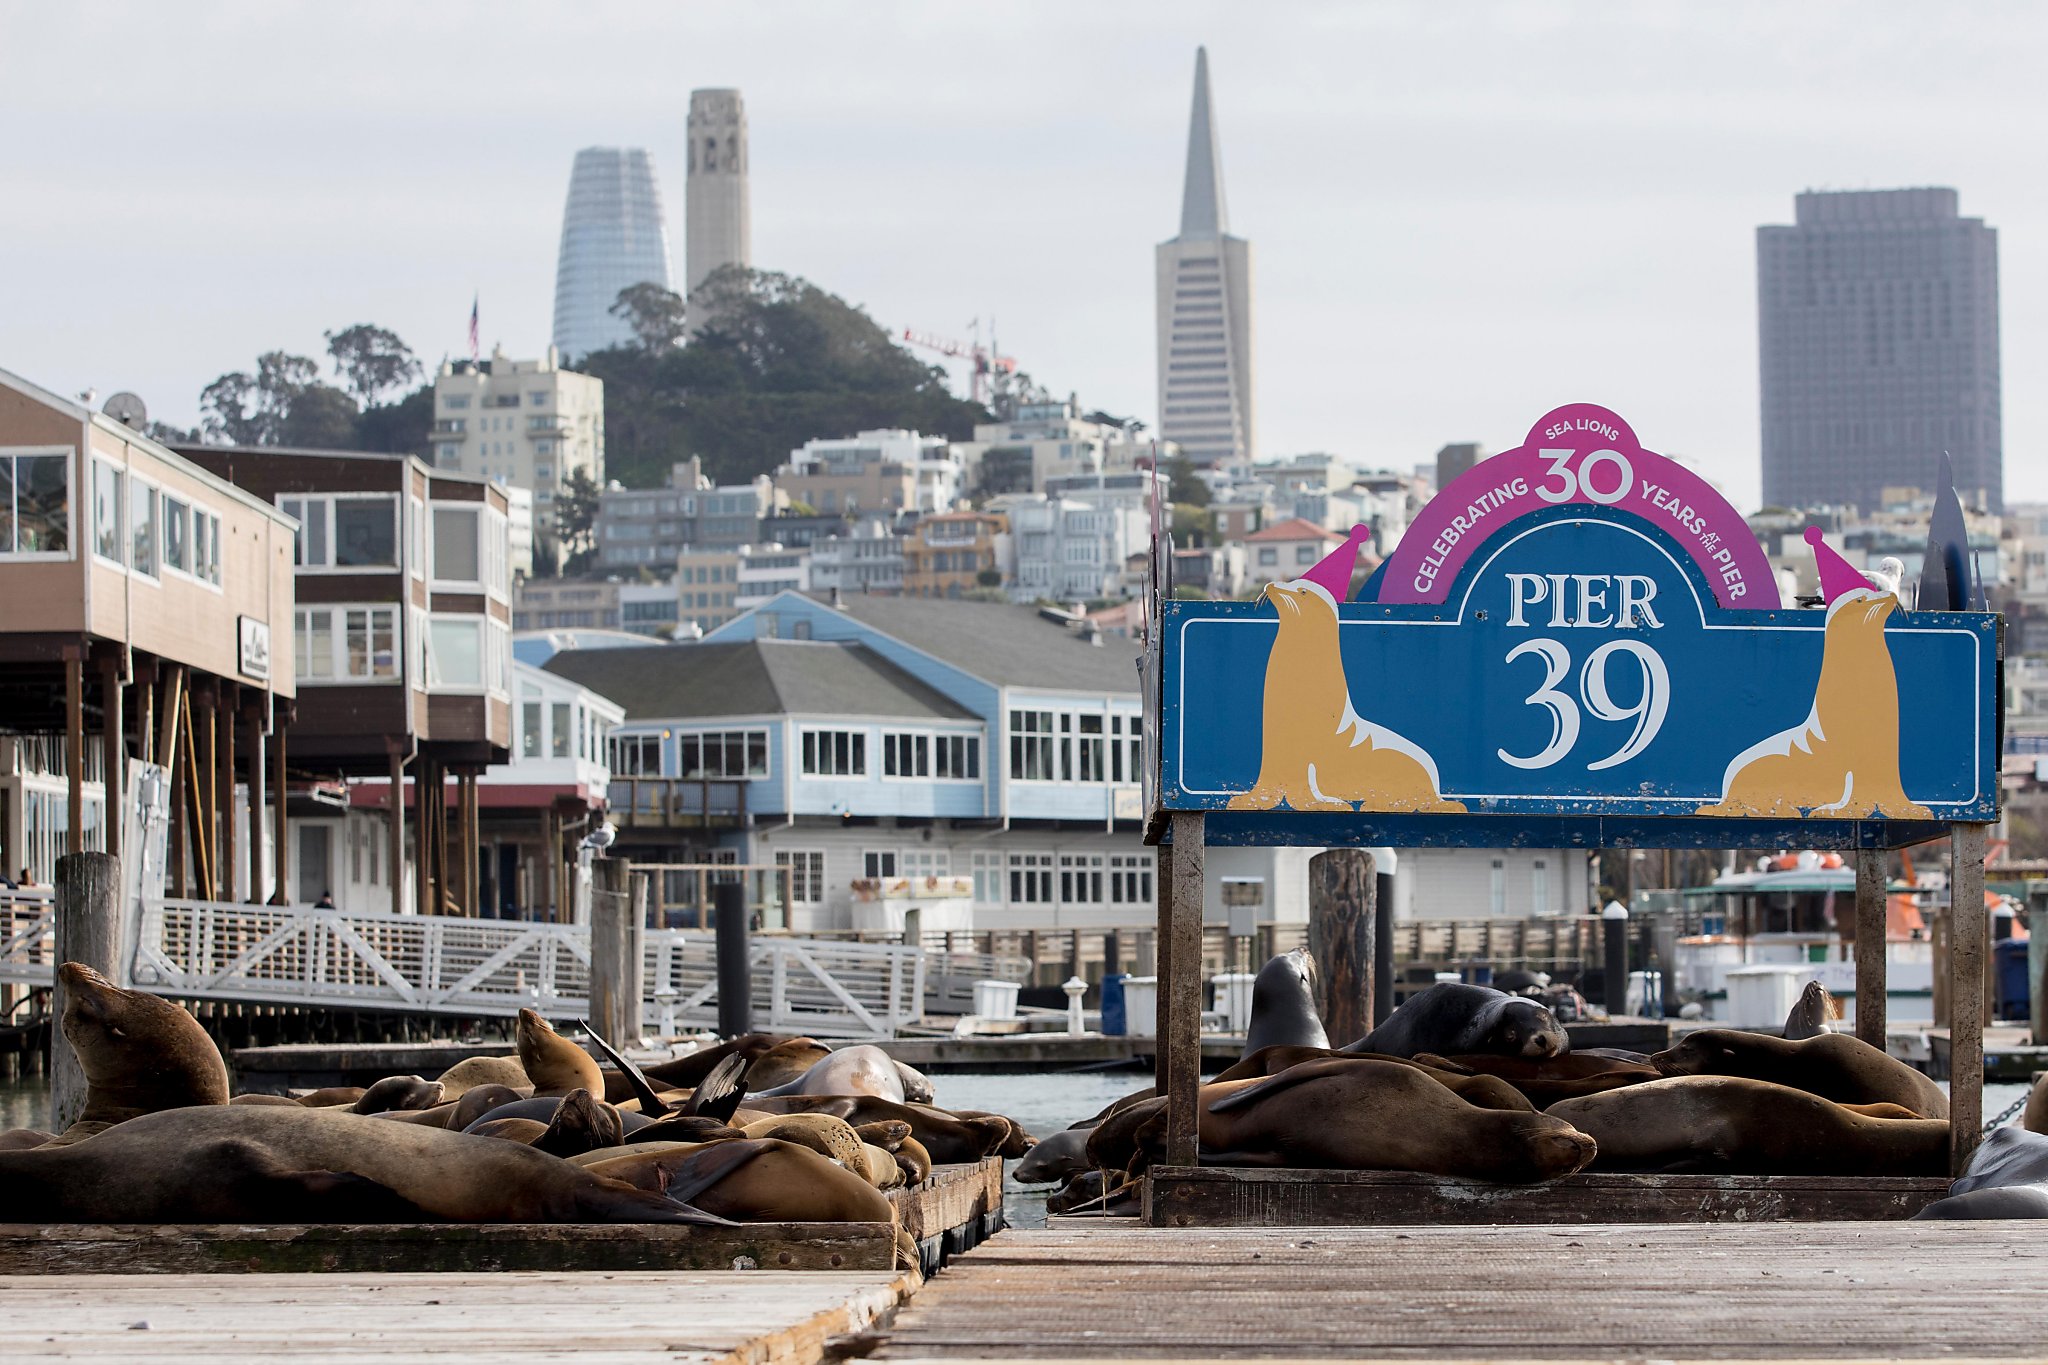 Pier 39 San Francisco (A Great Place To See Sea Lions